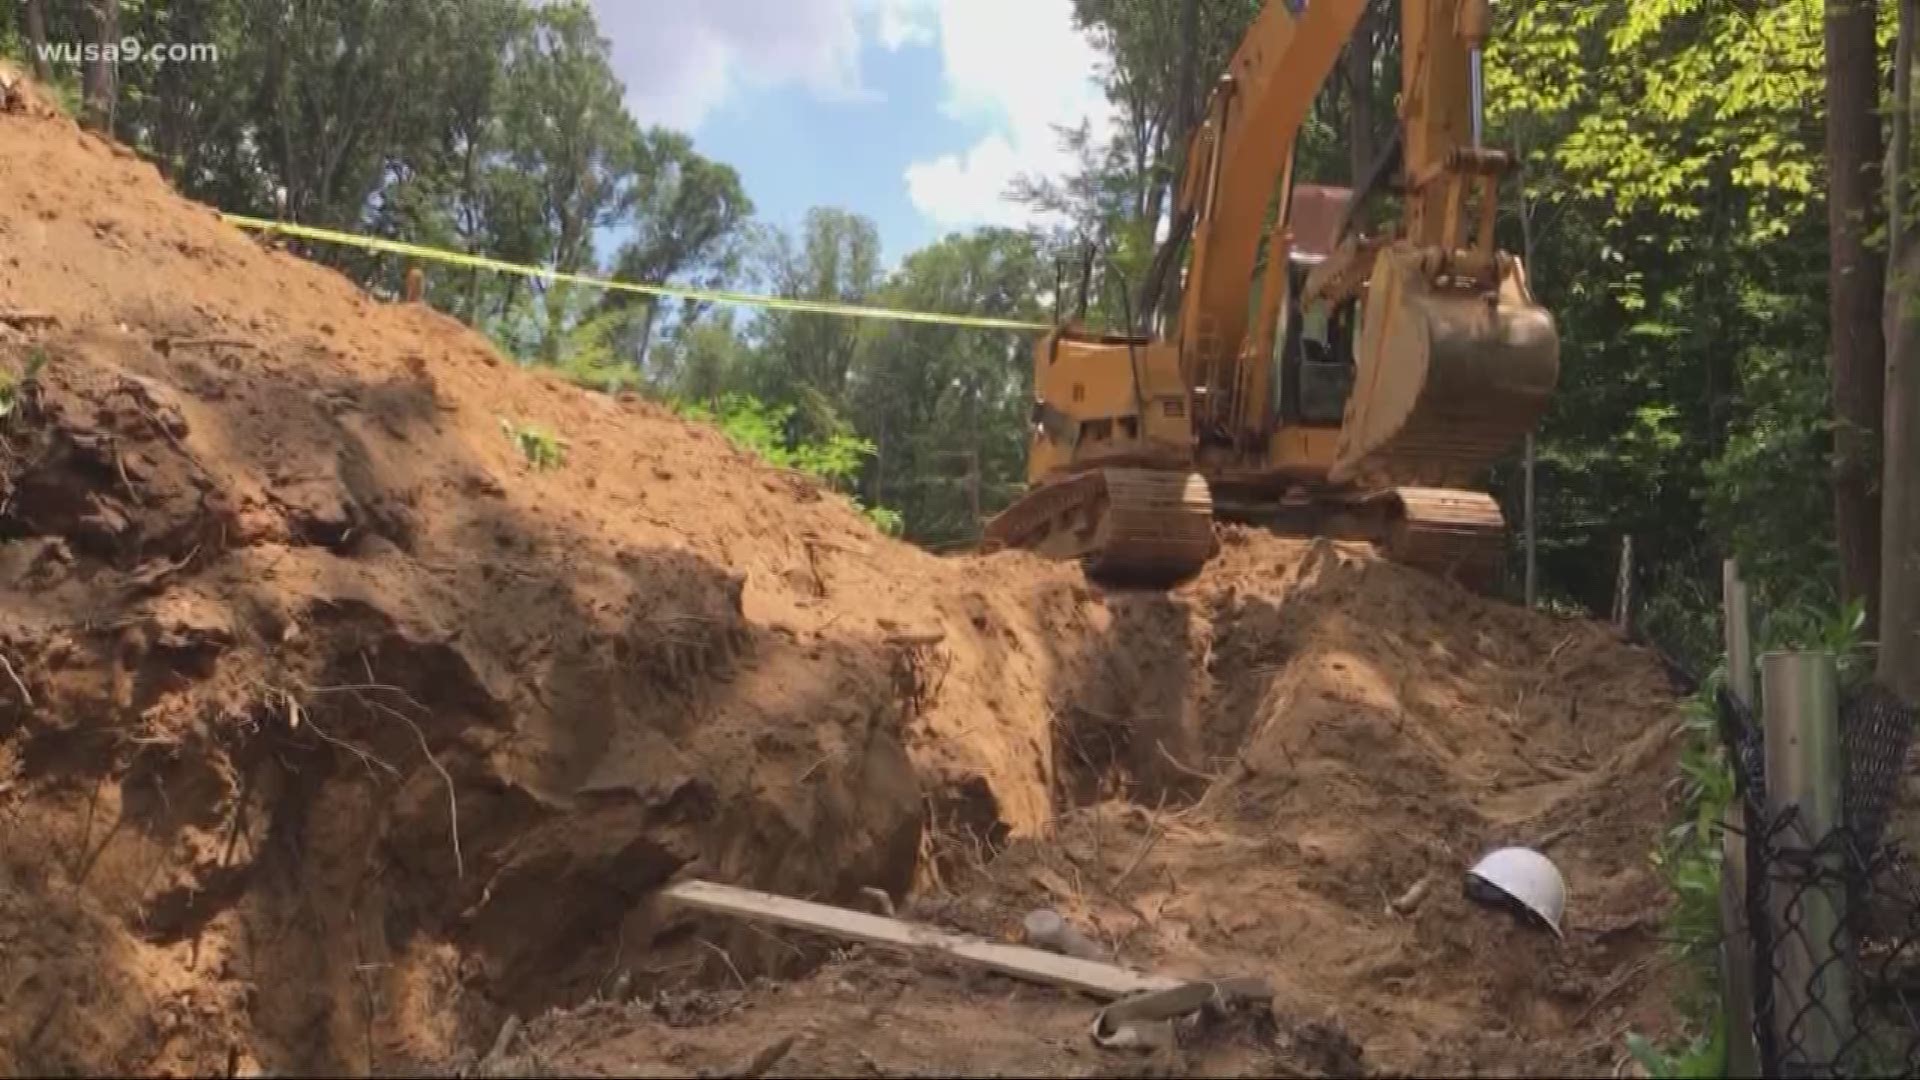 Virginia labor laws do allow 16-year-olds to work in construction, but not excavation.